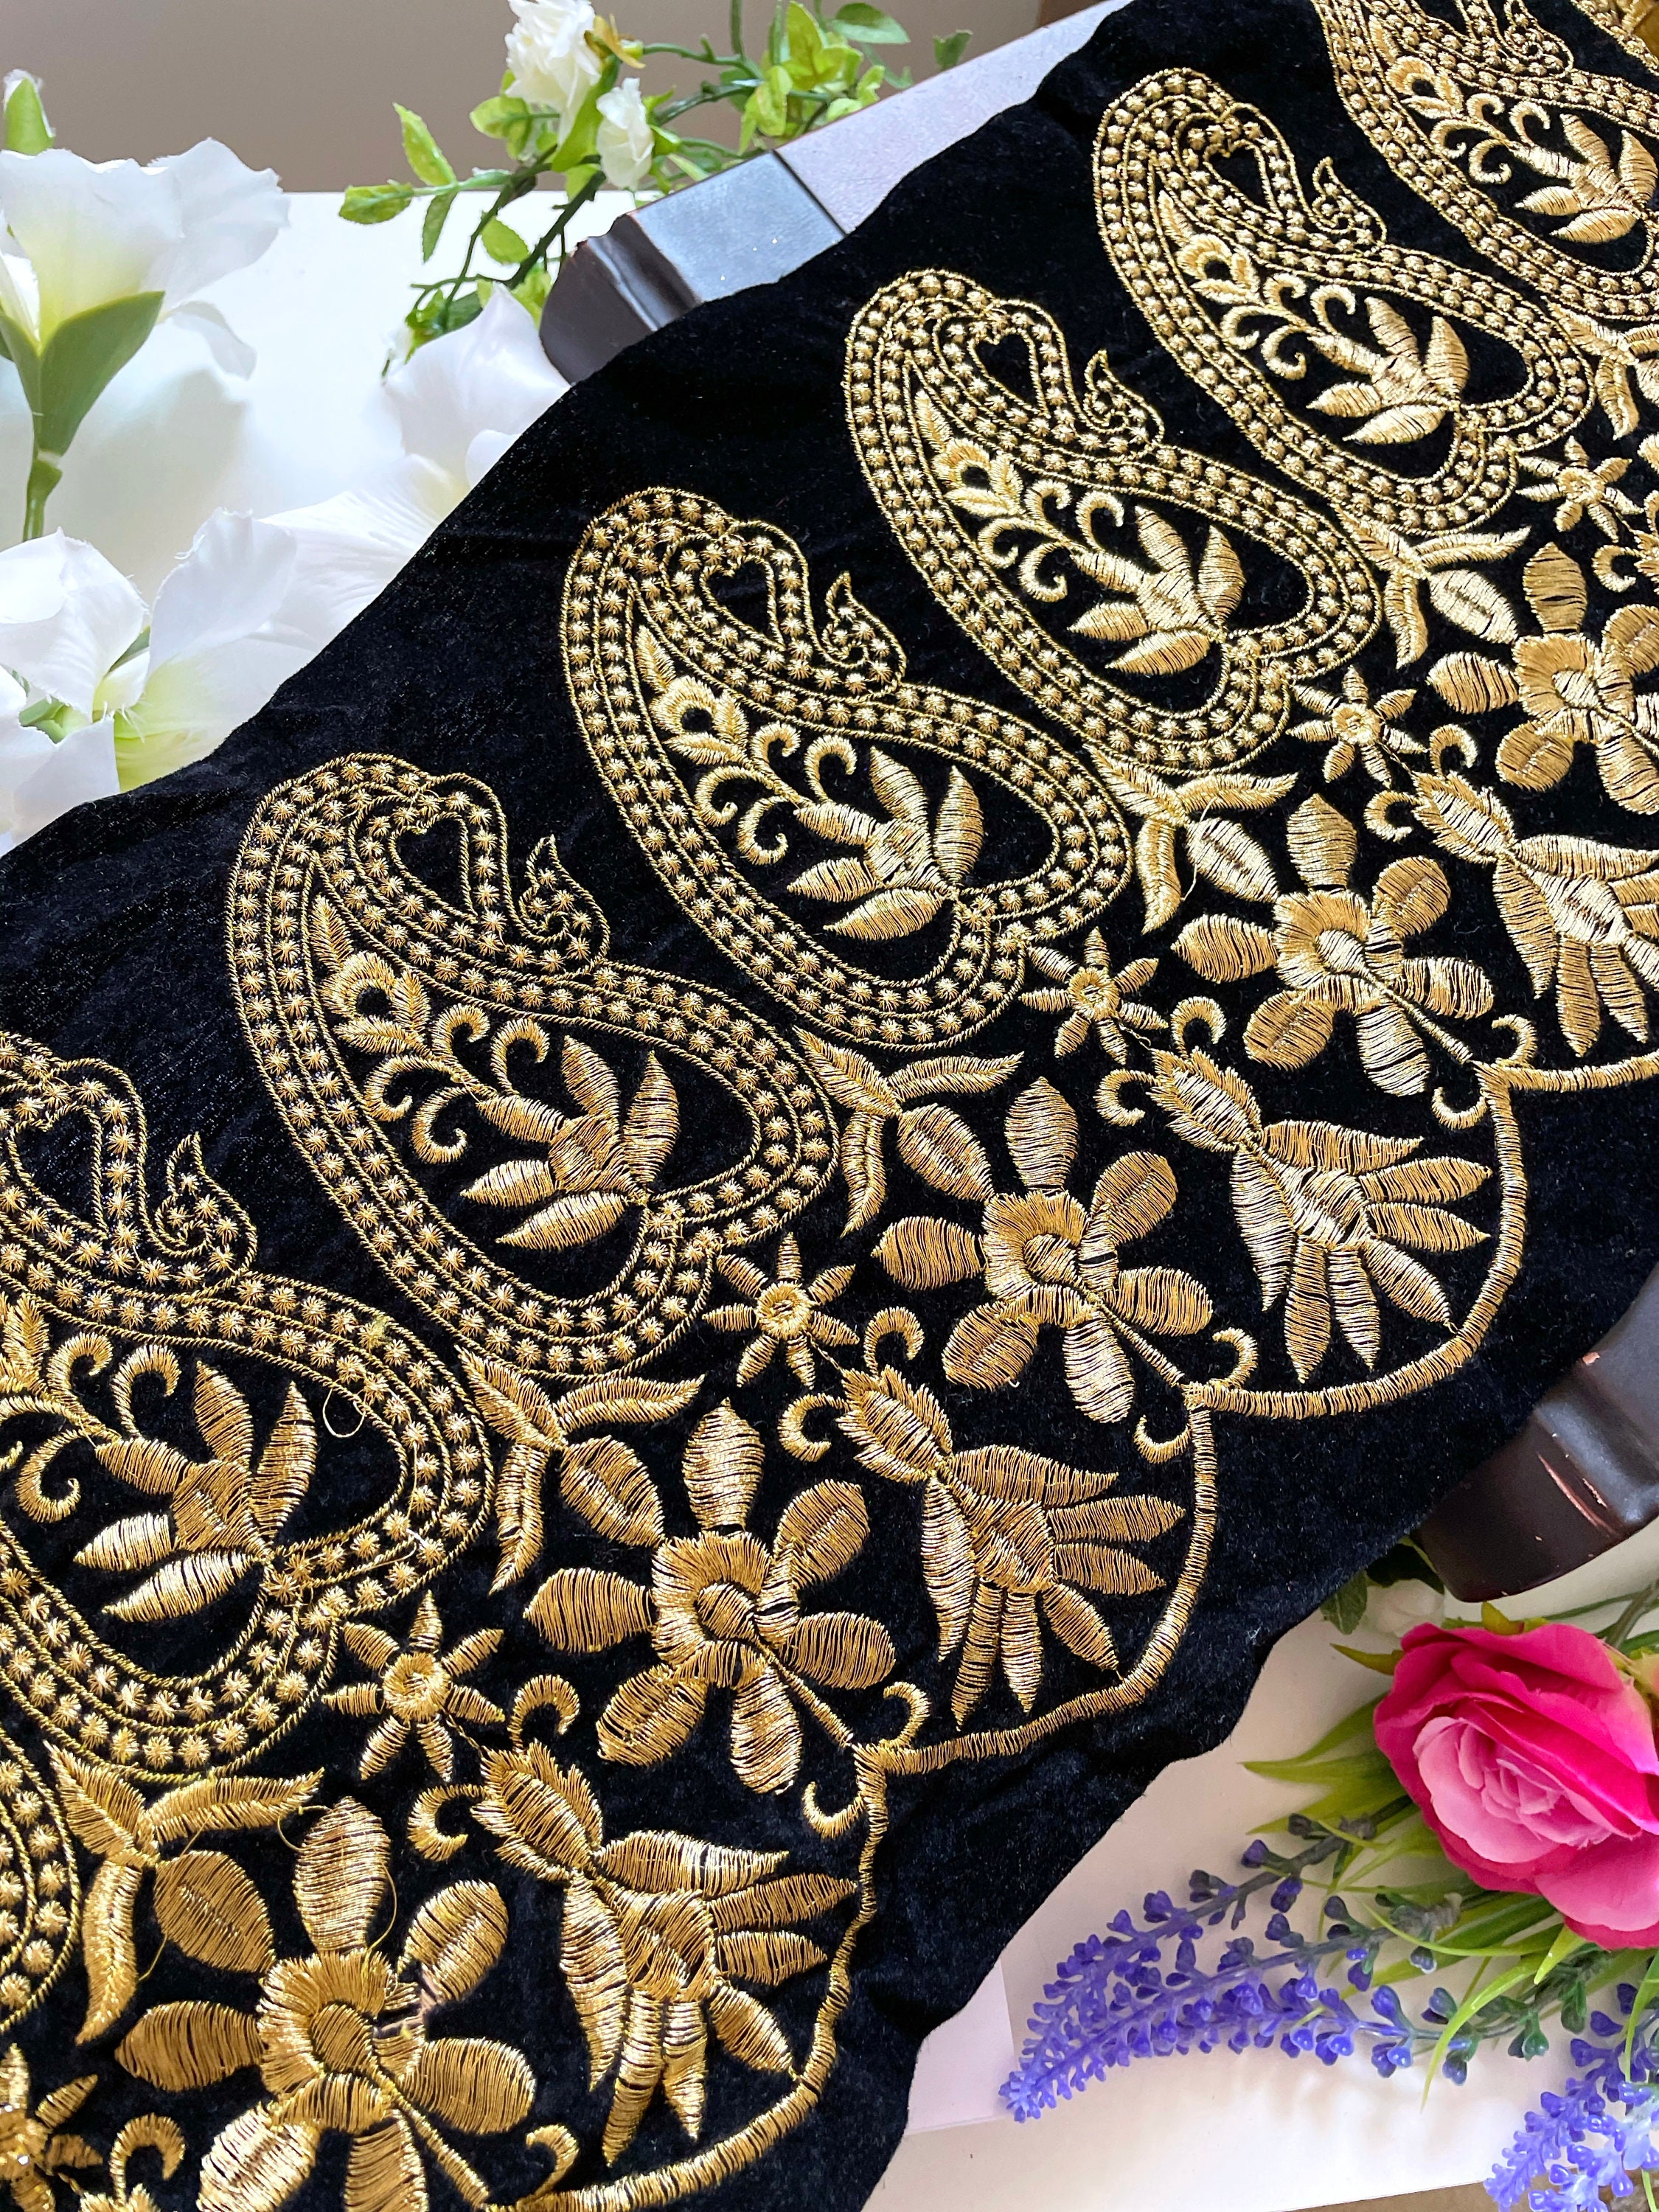 Zigzag Black Gold Trim Lace Embroidered Velvet Military Vestment LARP  Upholstery Home Decor Sewing Crafts